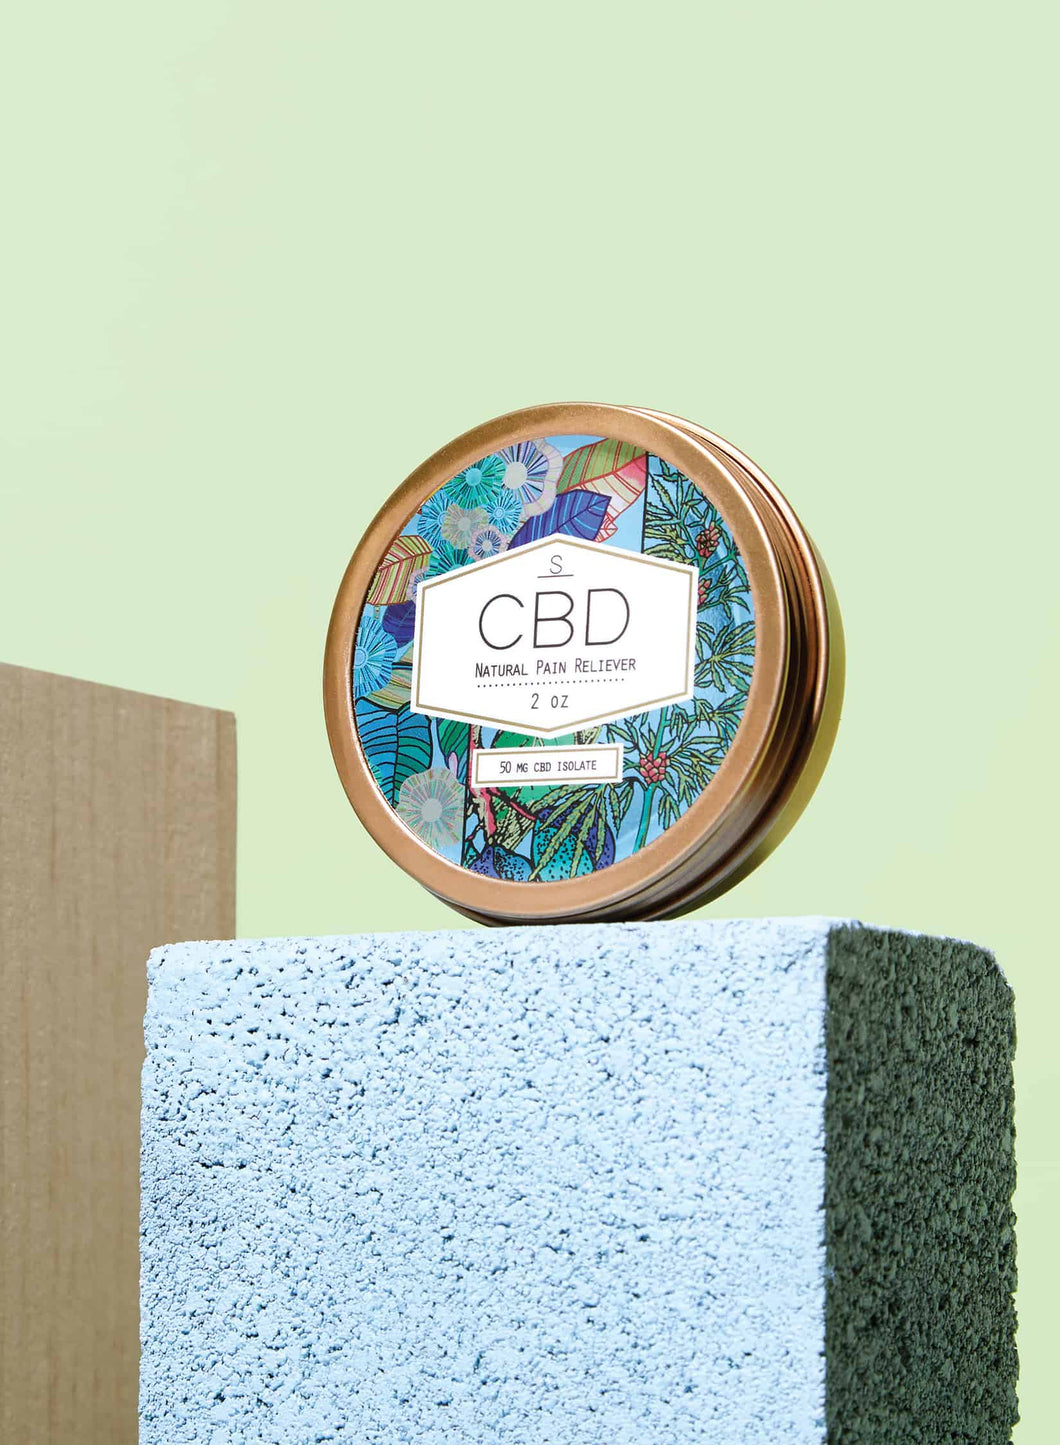 CBD Muscle, Joint and Skin Balm